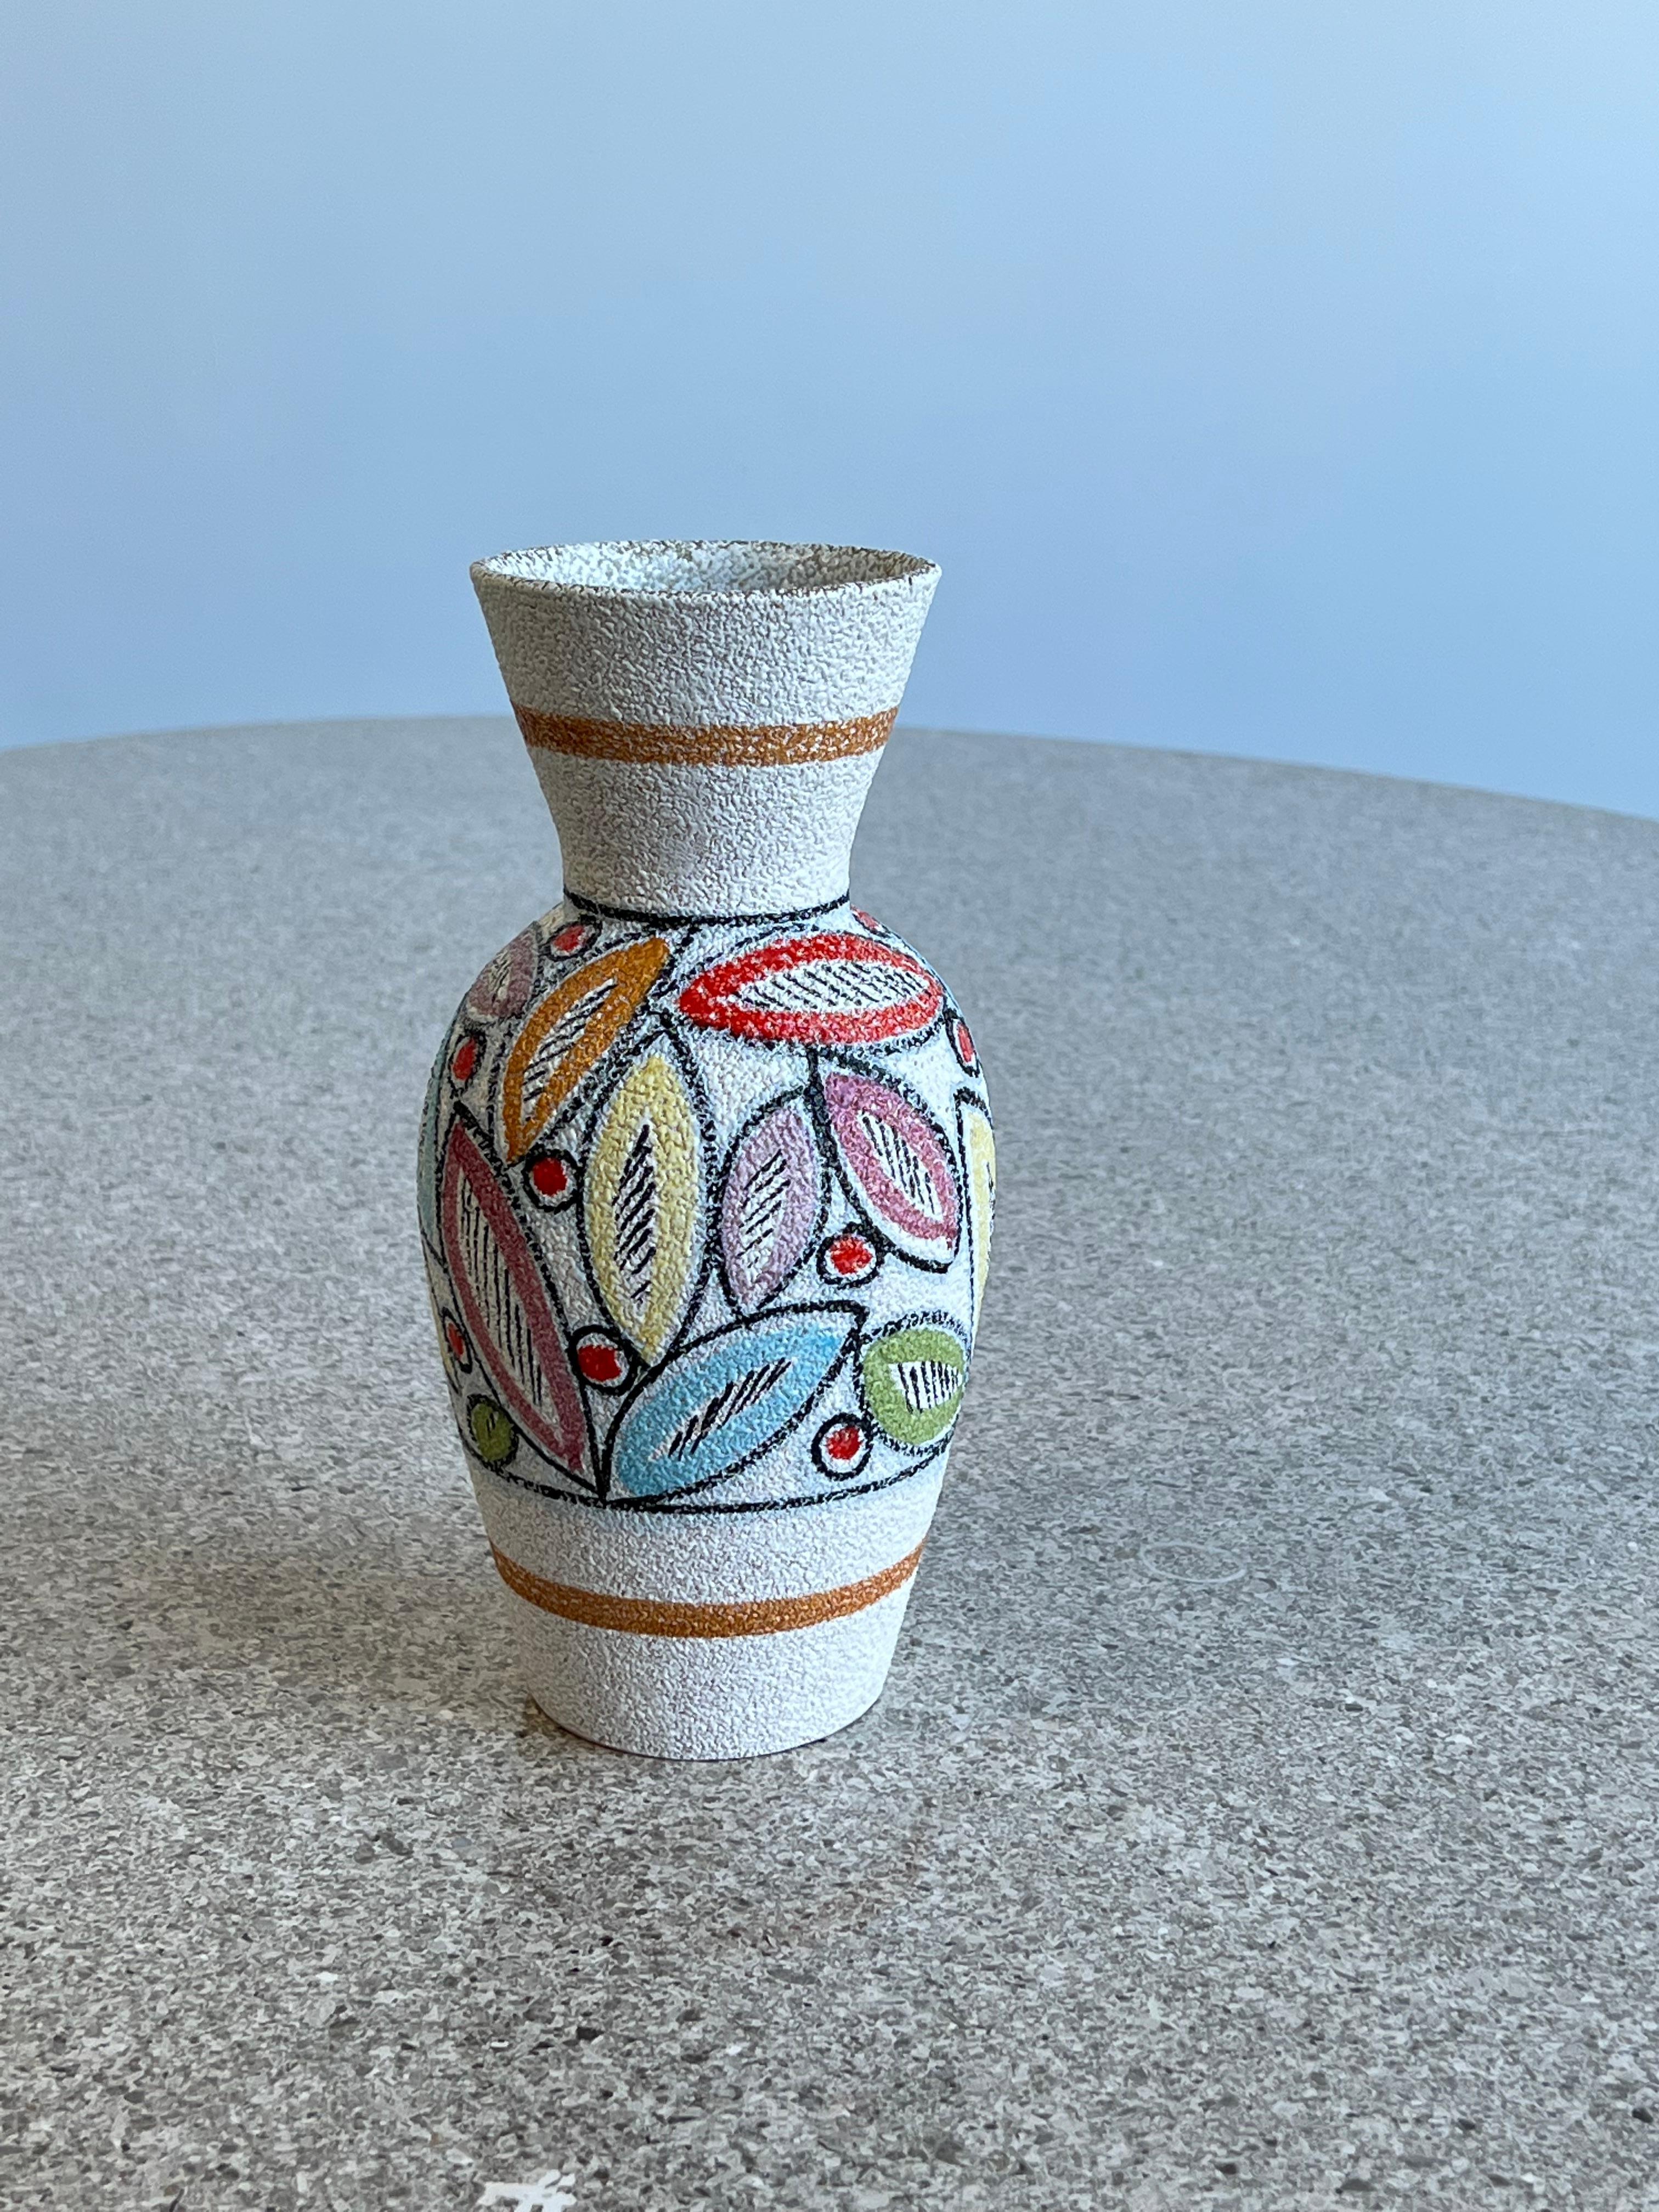 Italian Ceramic hand painted vase 1950s.
Magnificent vase hand painted with colourful abstract leafs, amazing ceramic texture.